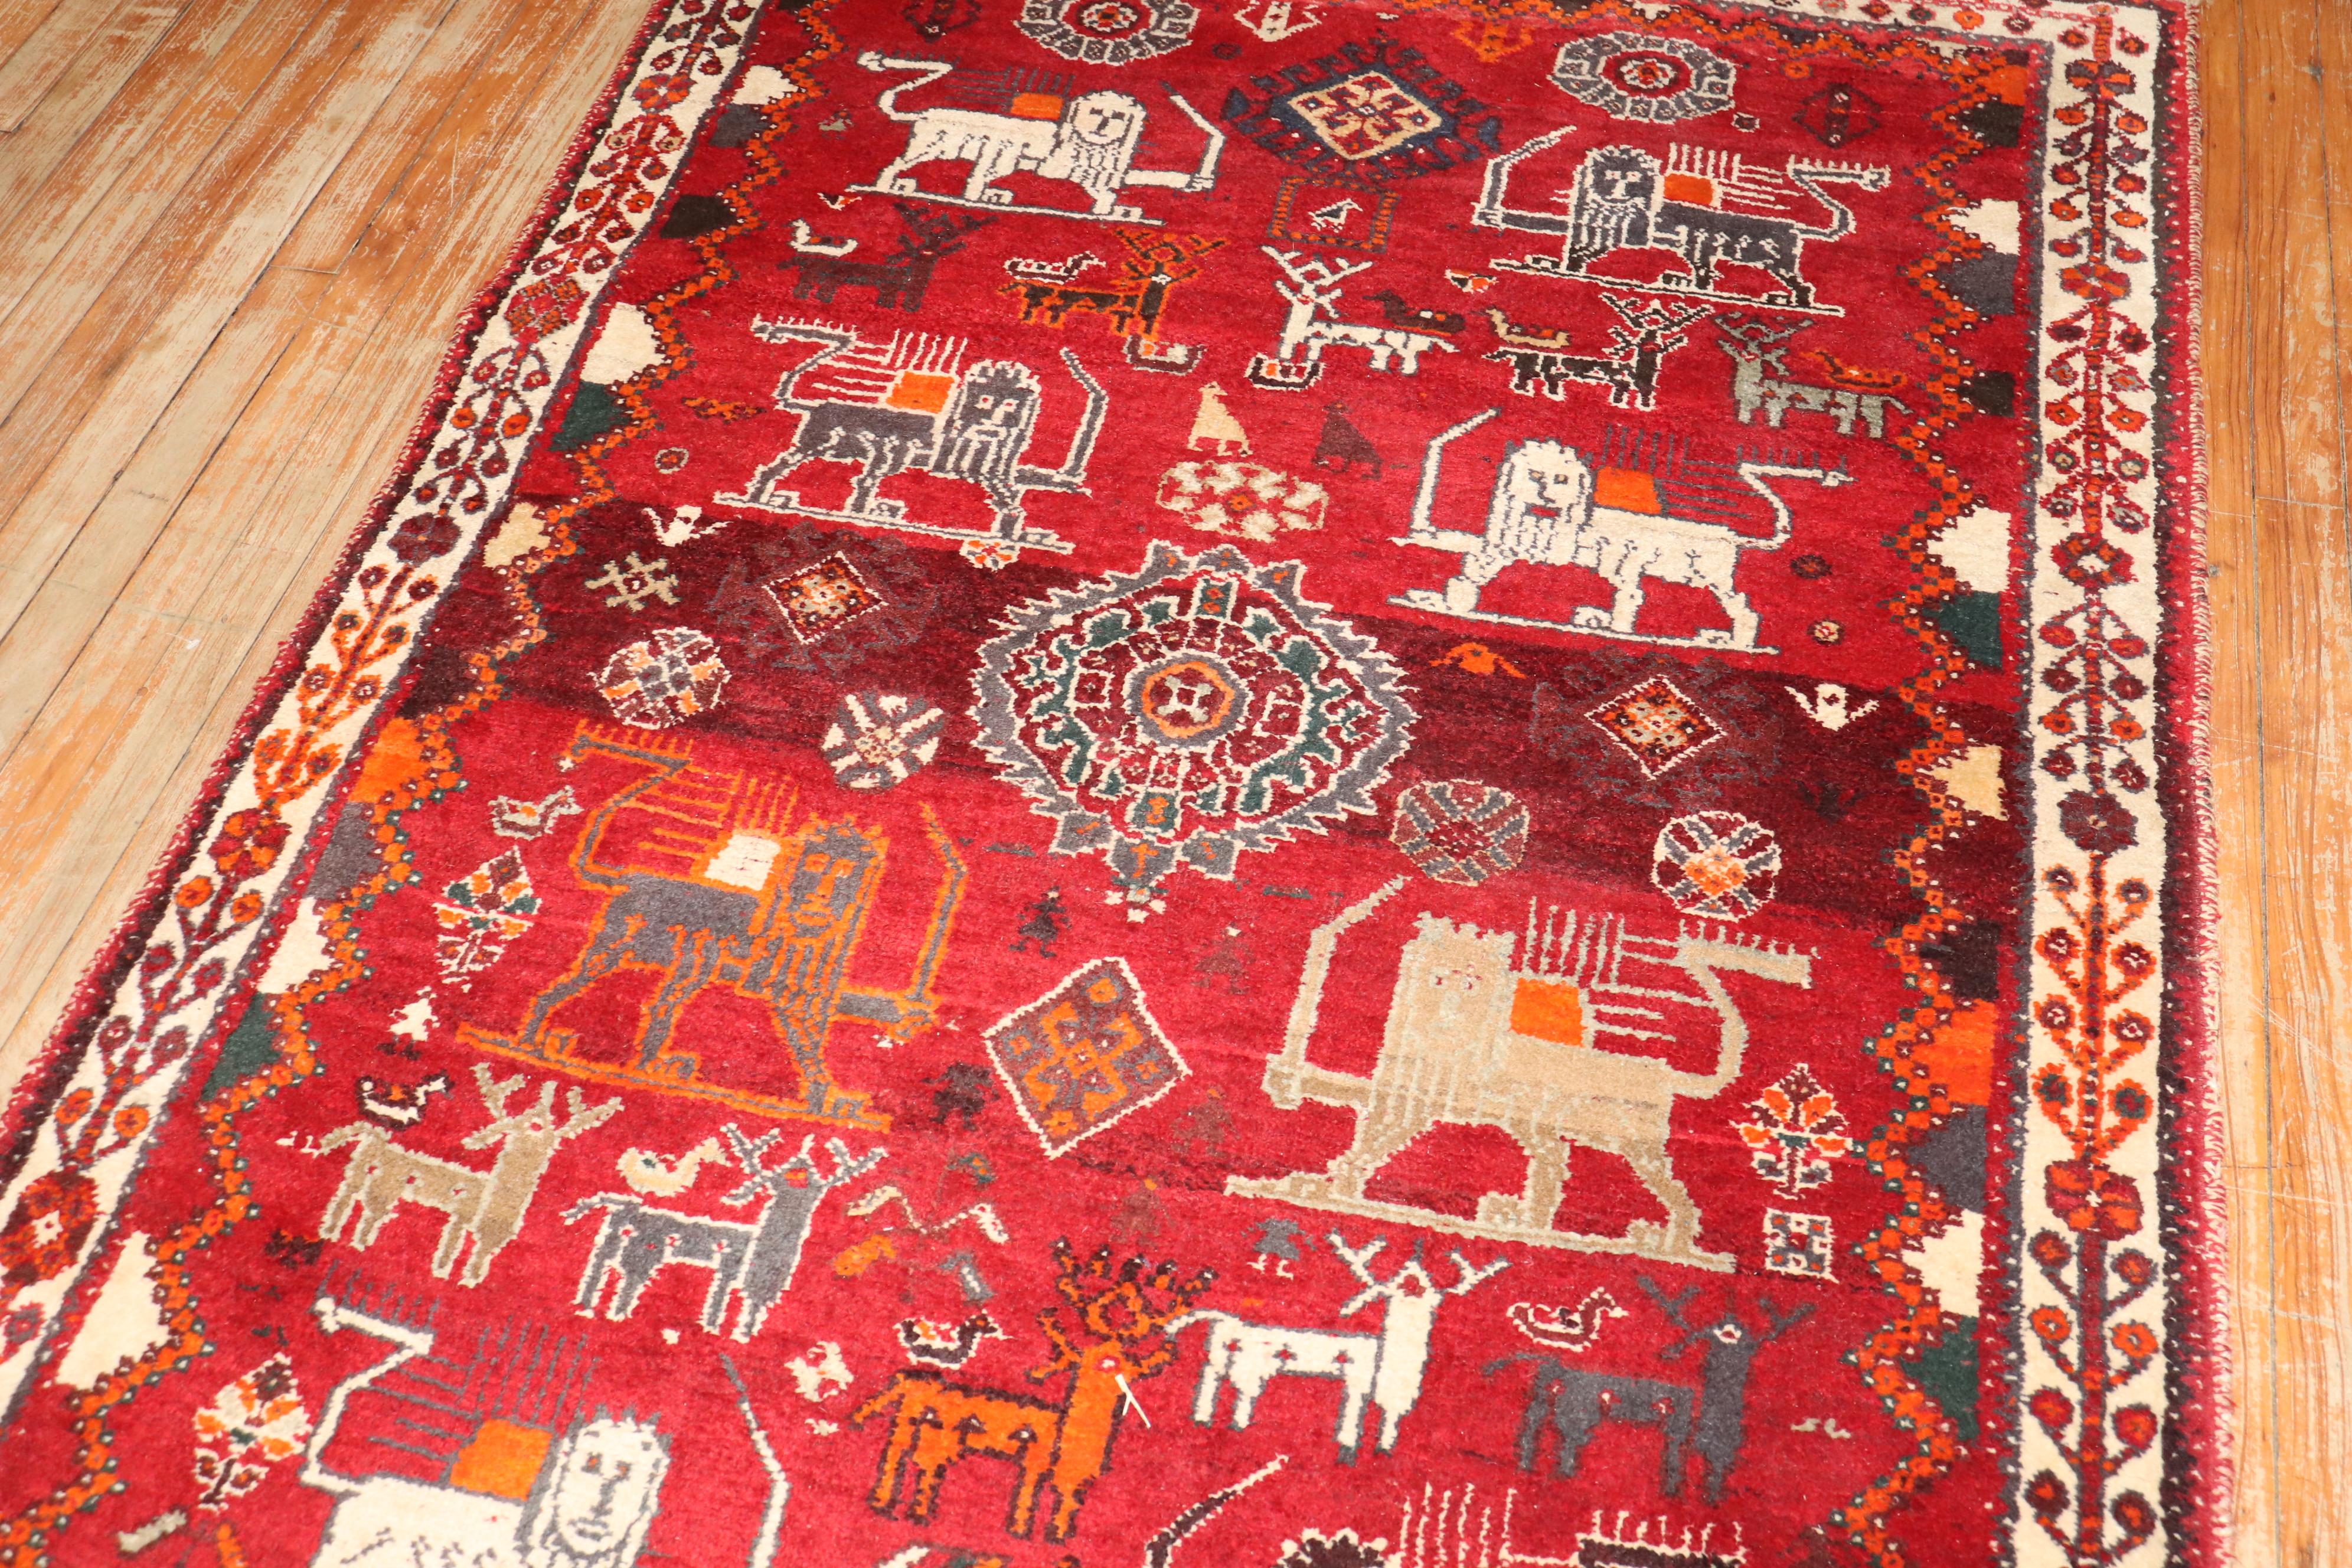 One-of-a-kind Persian animal motif red Gabbeh rug from the late 20th century

Measures: 4' x 6'3''.